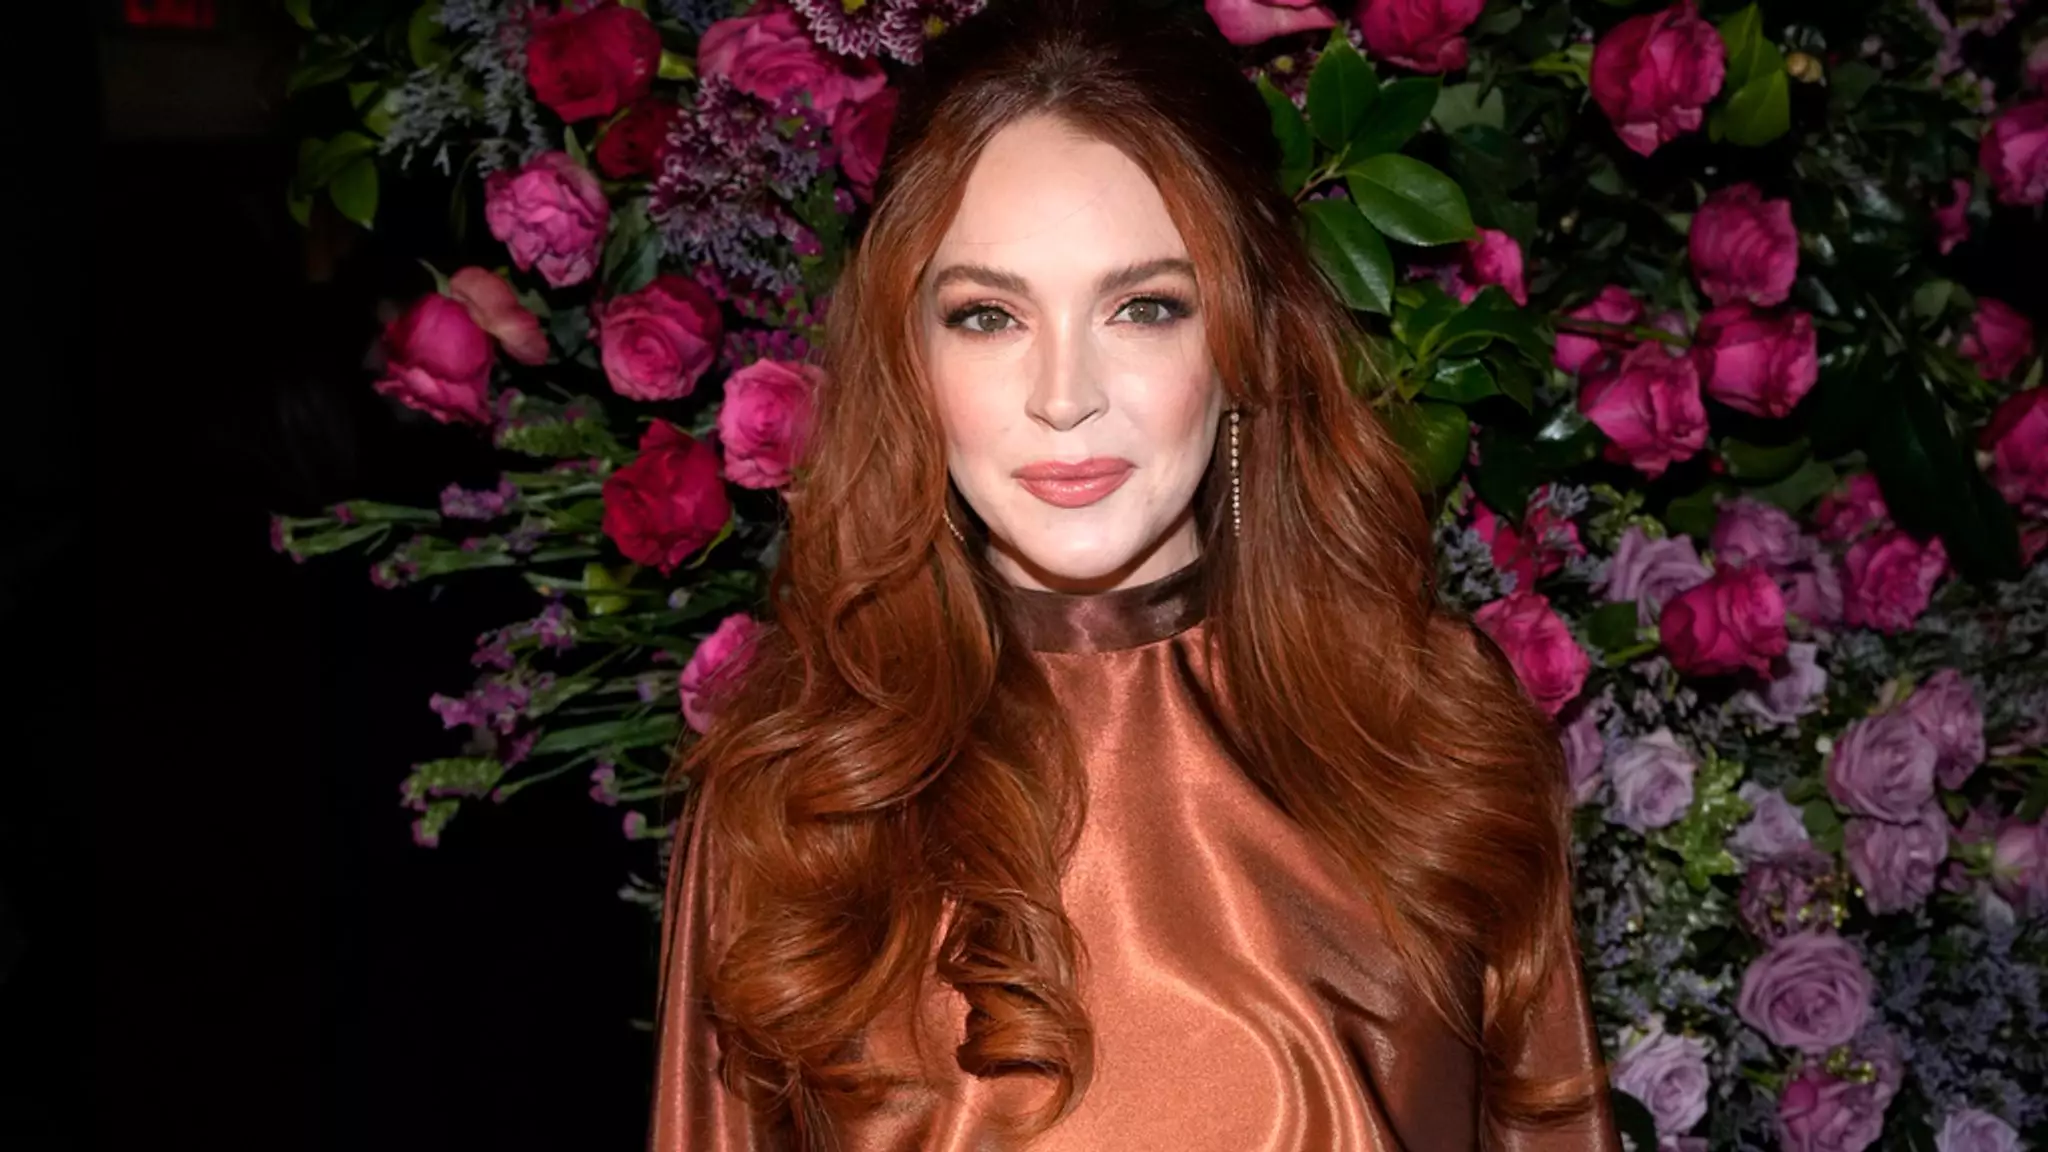 is lindsey lohan pregnant